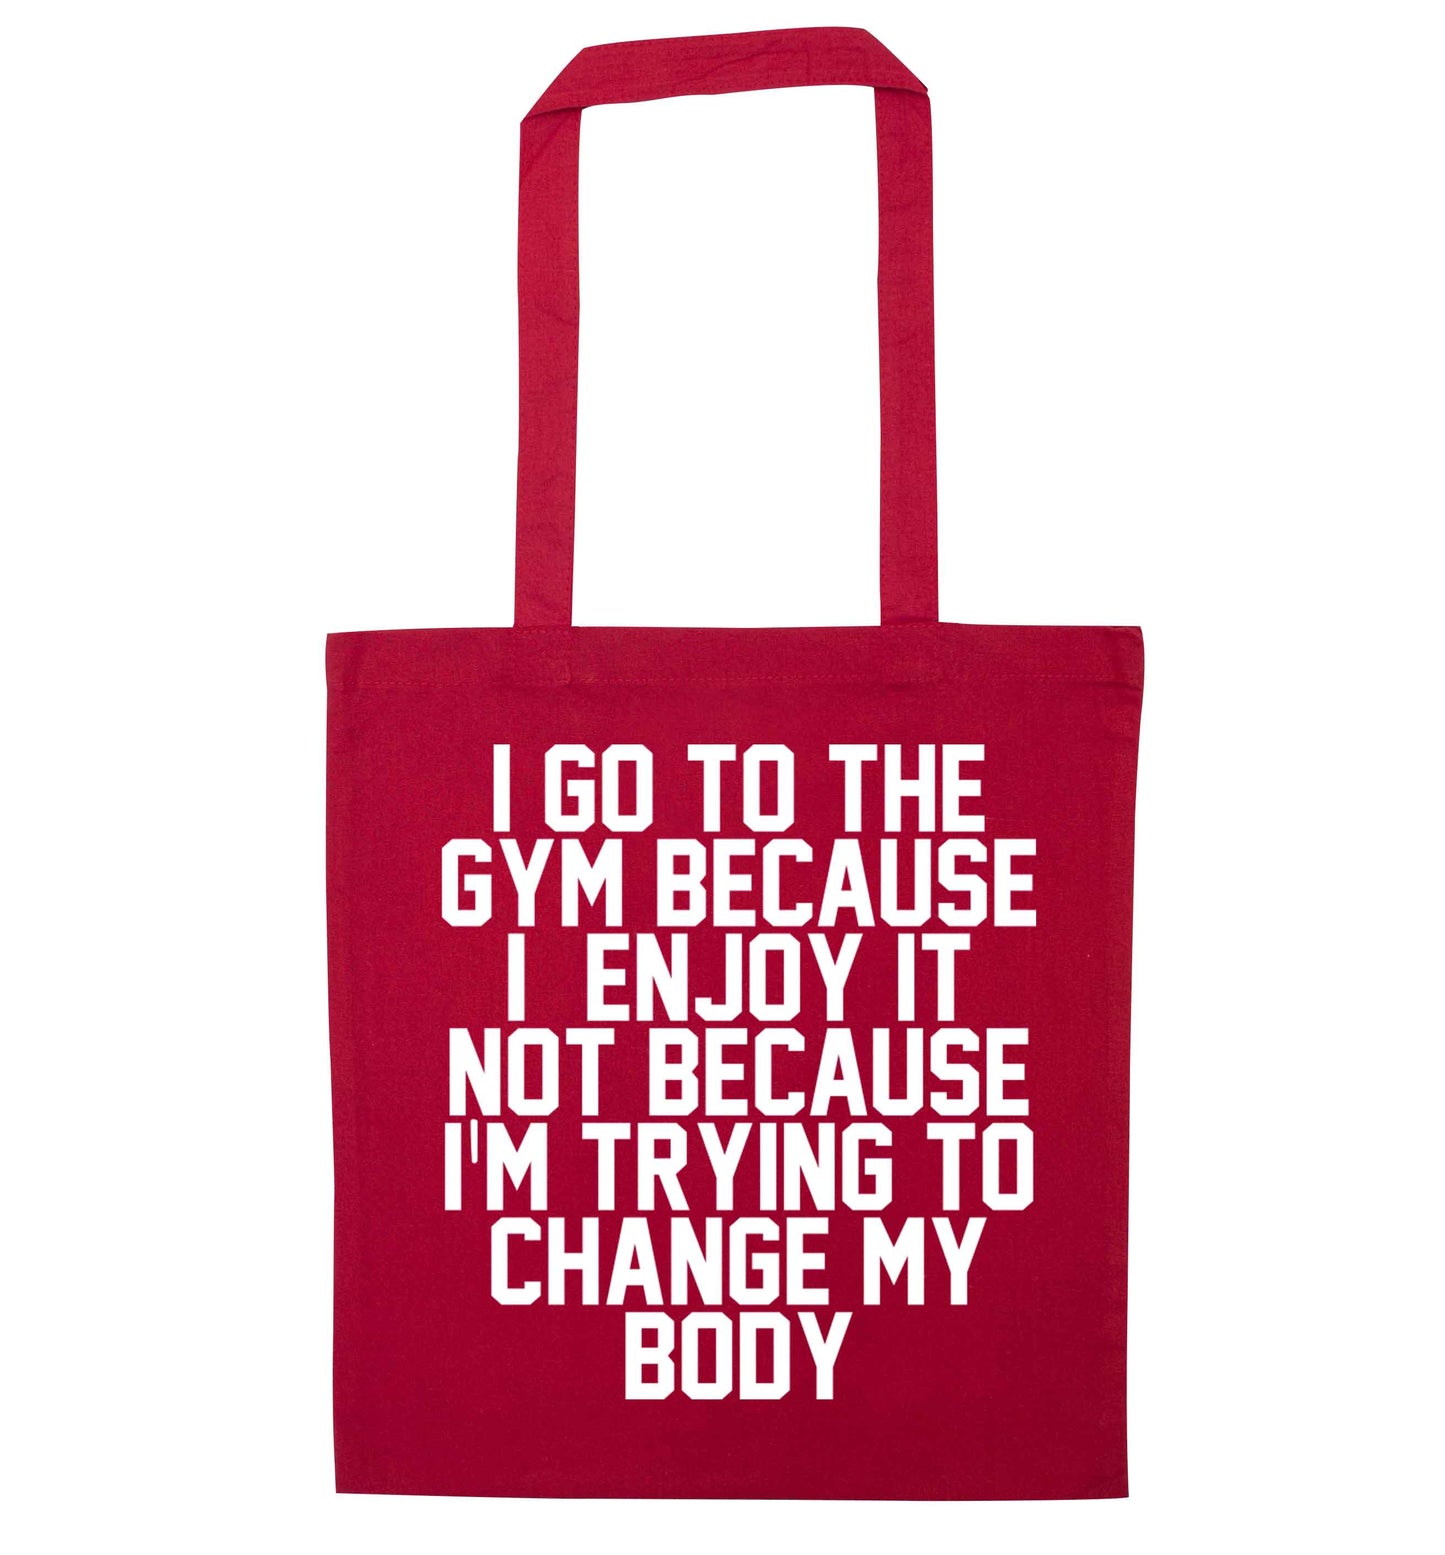 I go to the gym because I enjoy it not because I'm trying to change my body red tote bag